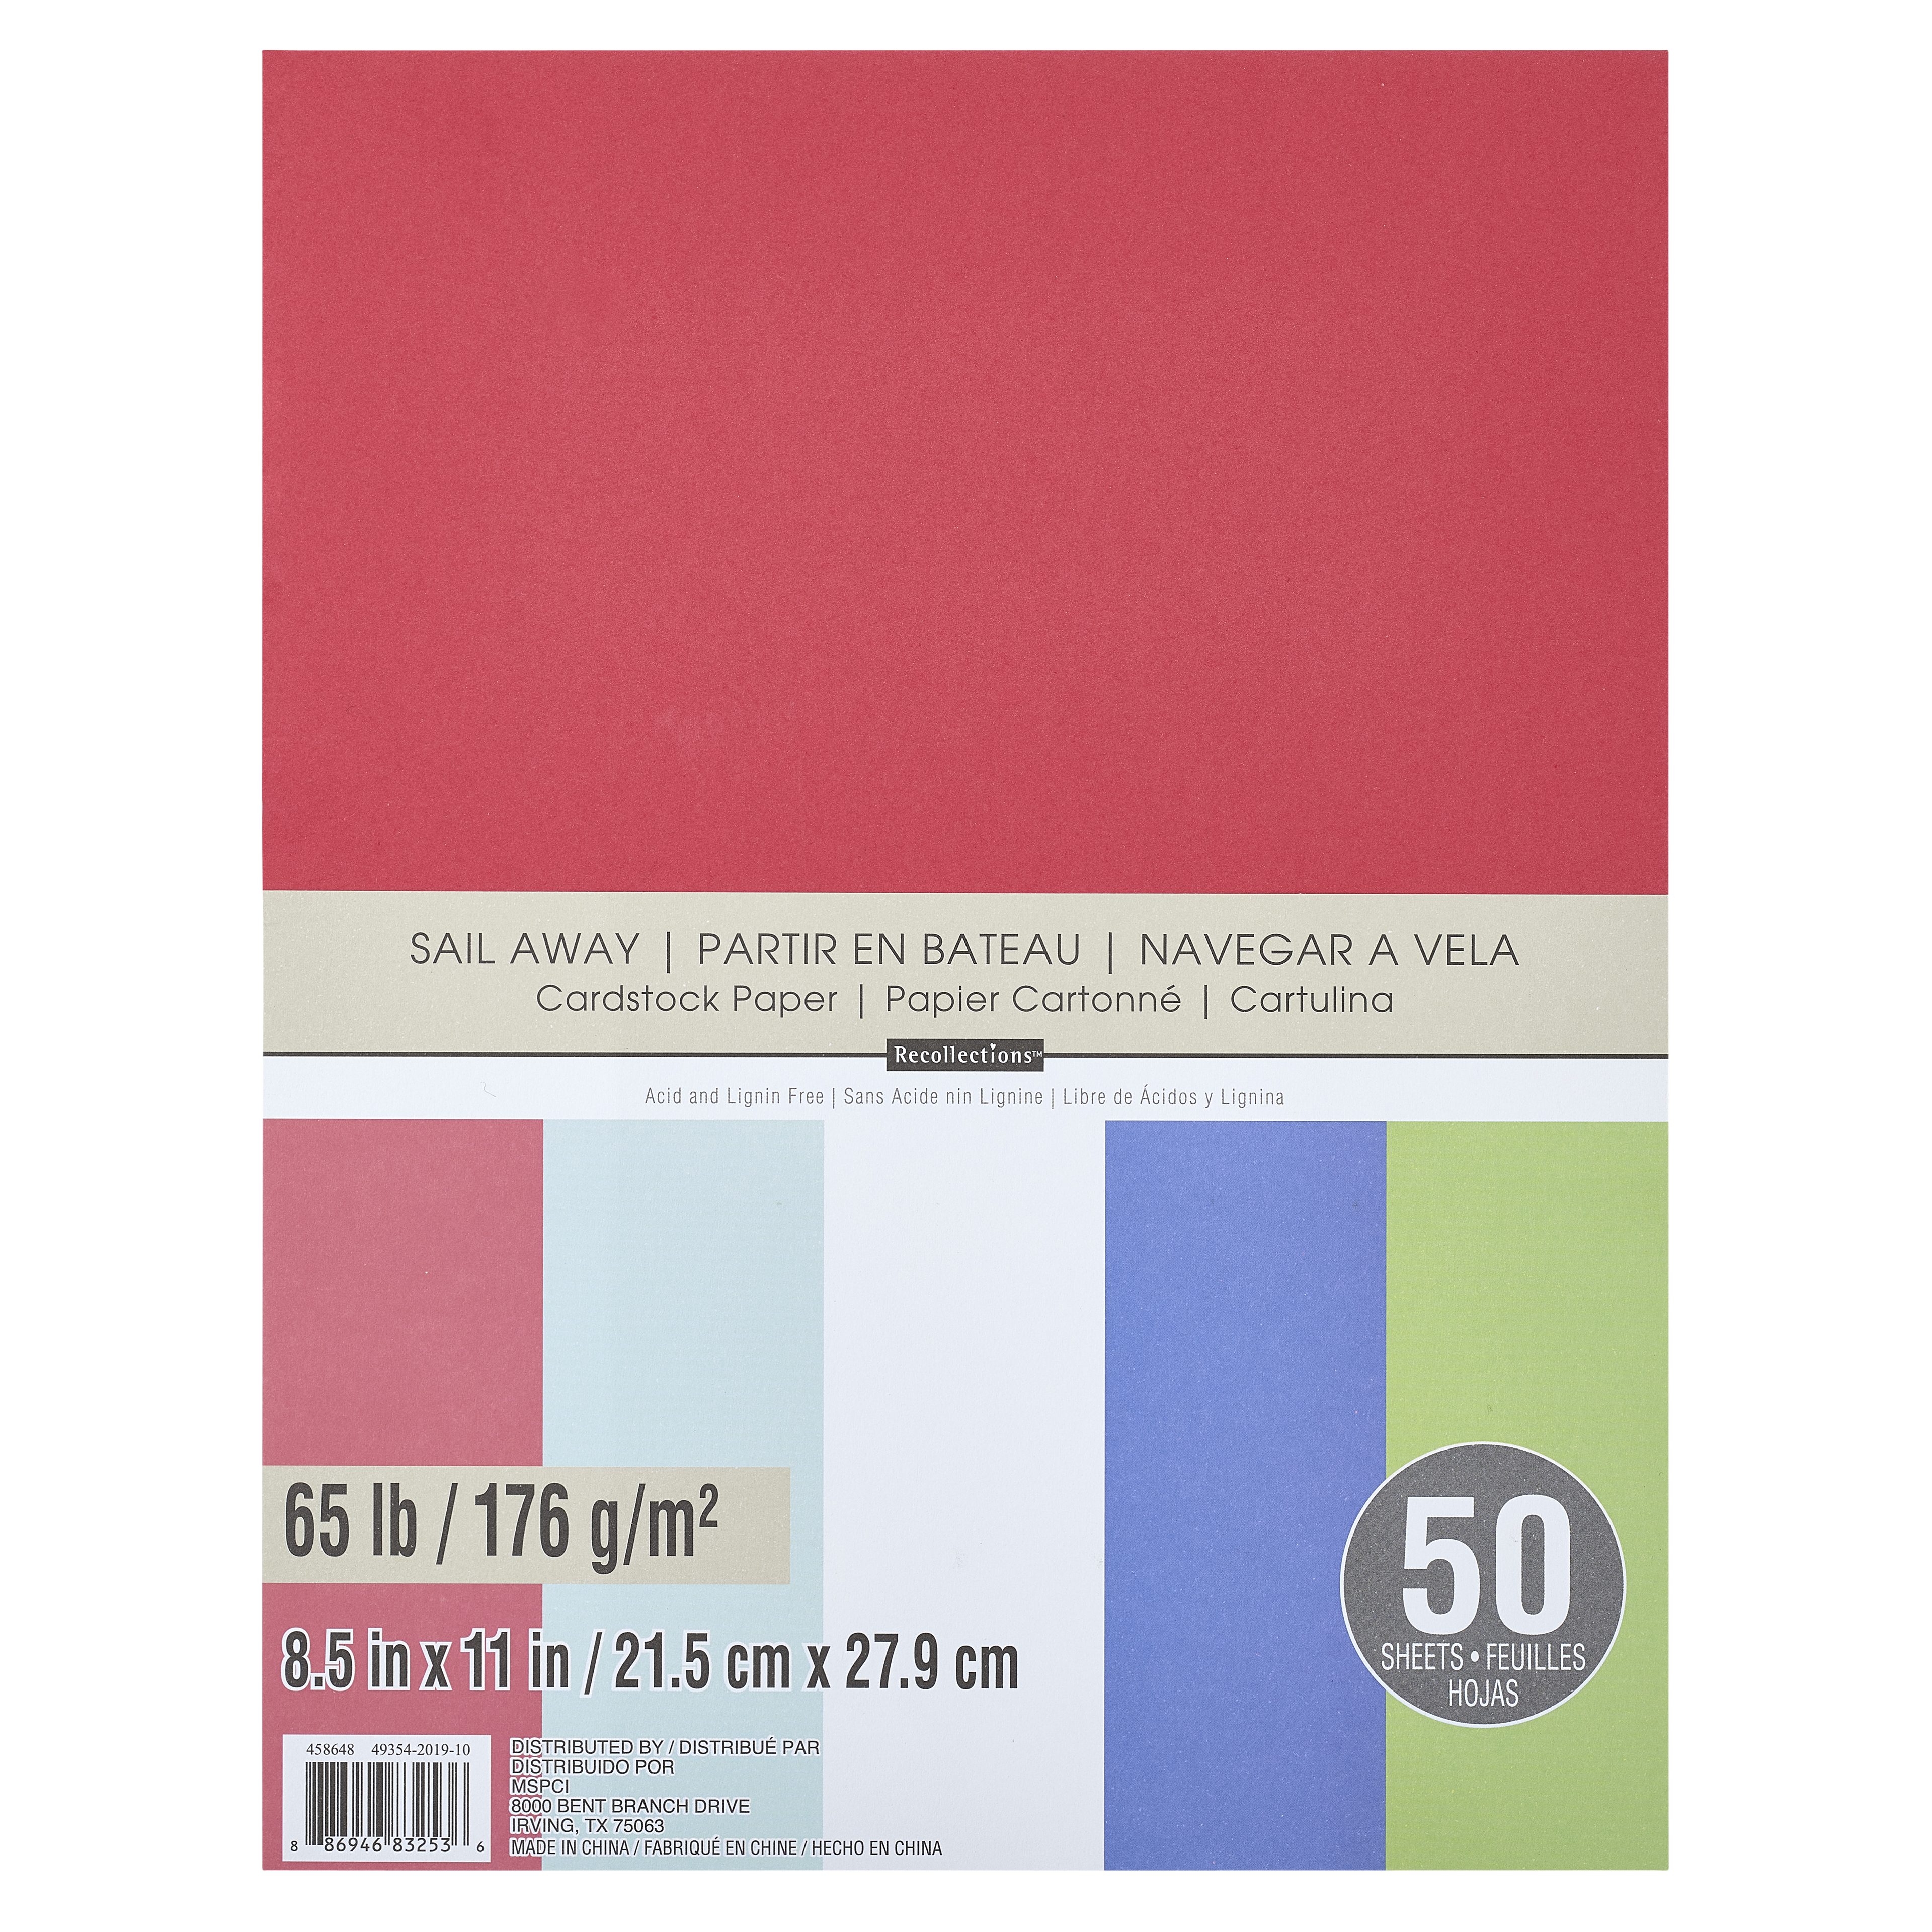 Sail Away 8.5 x 11 Cardstock Paper by Recollections™, 50 Sheets